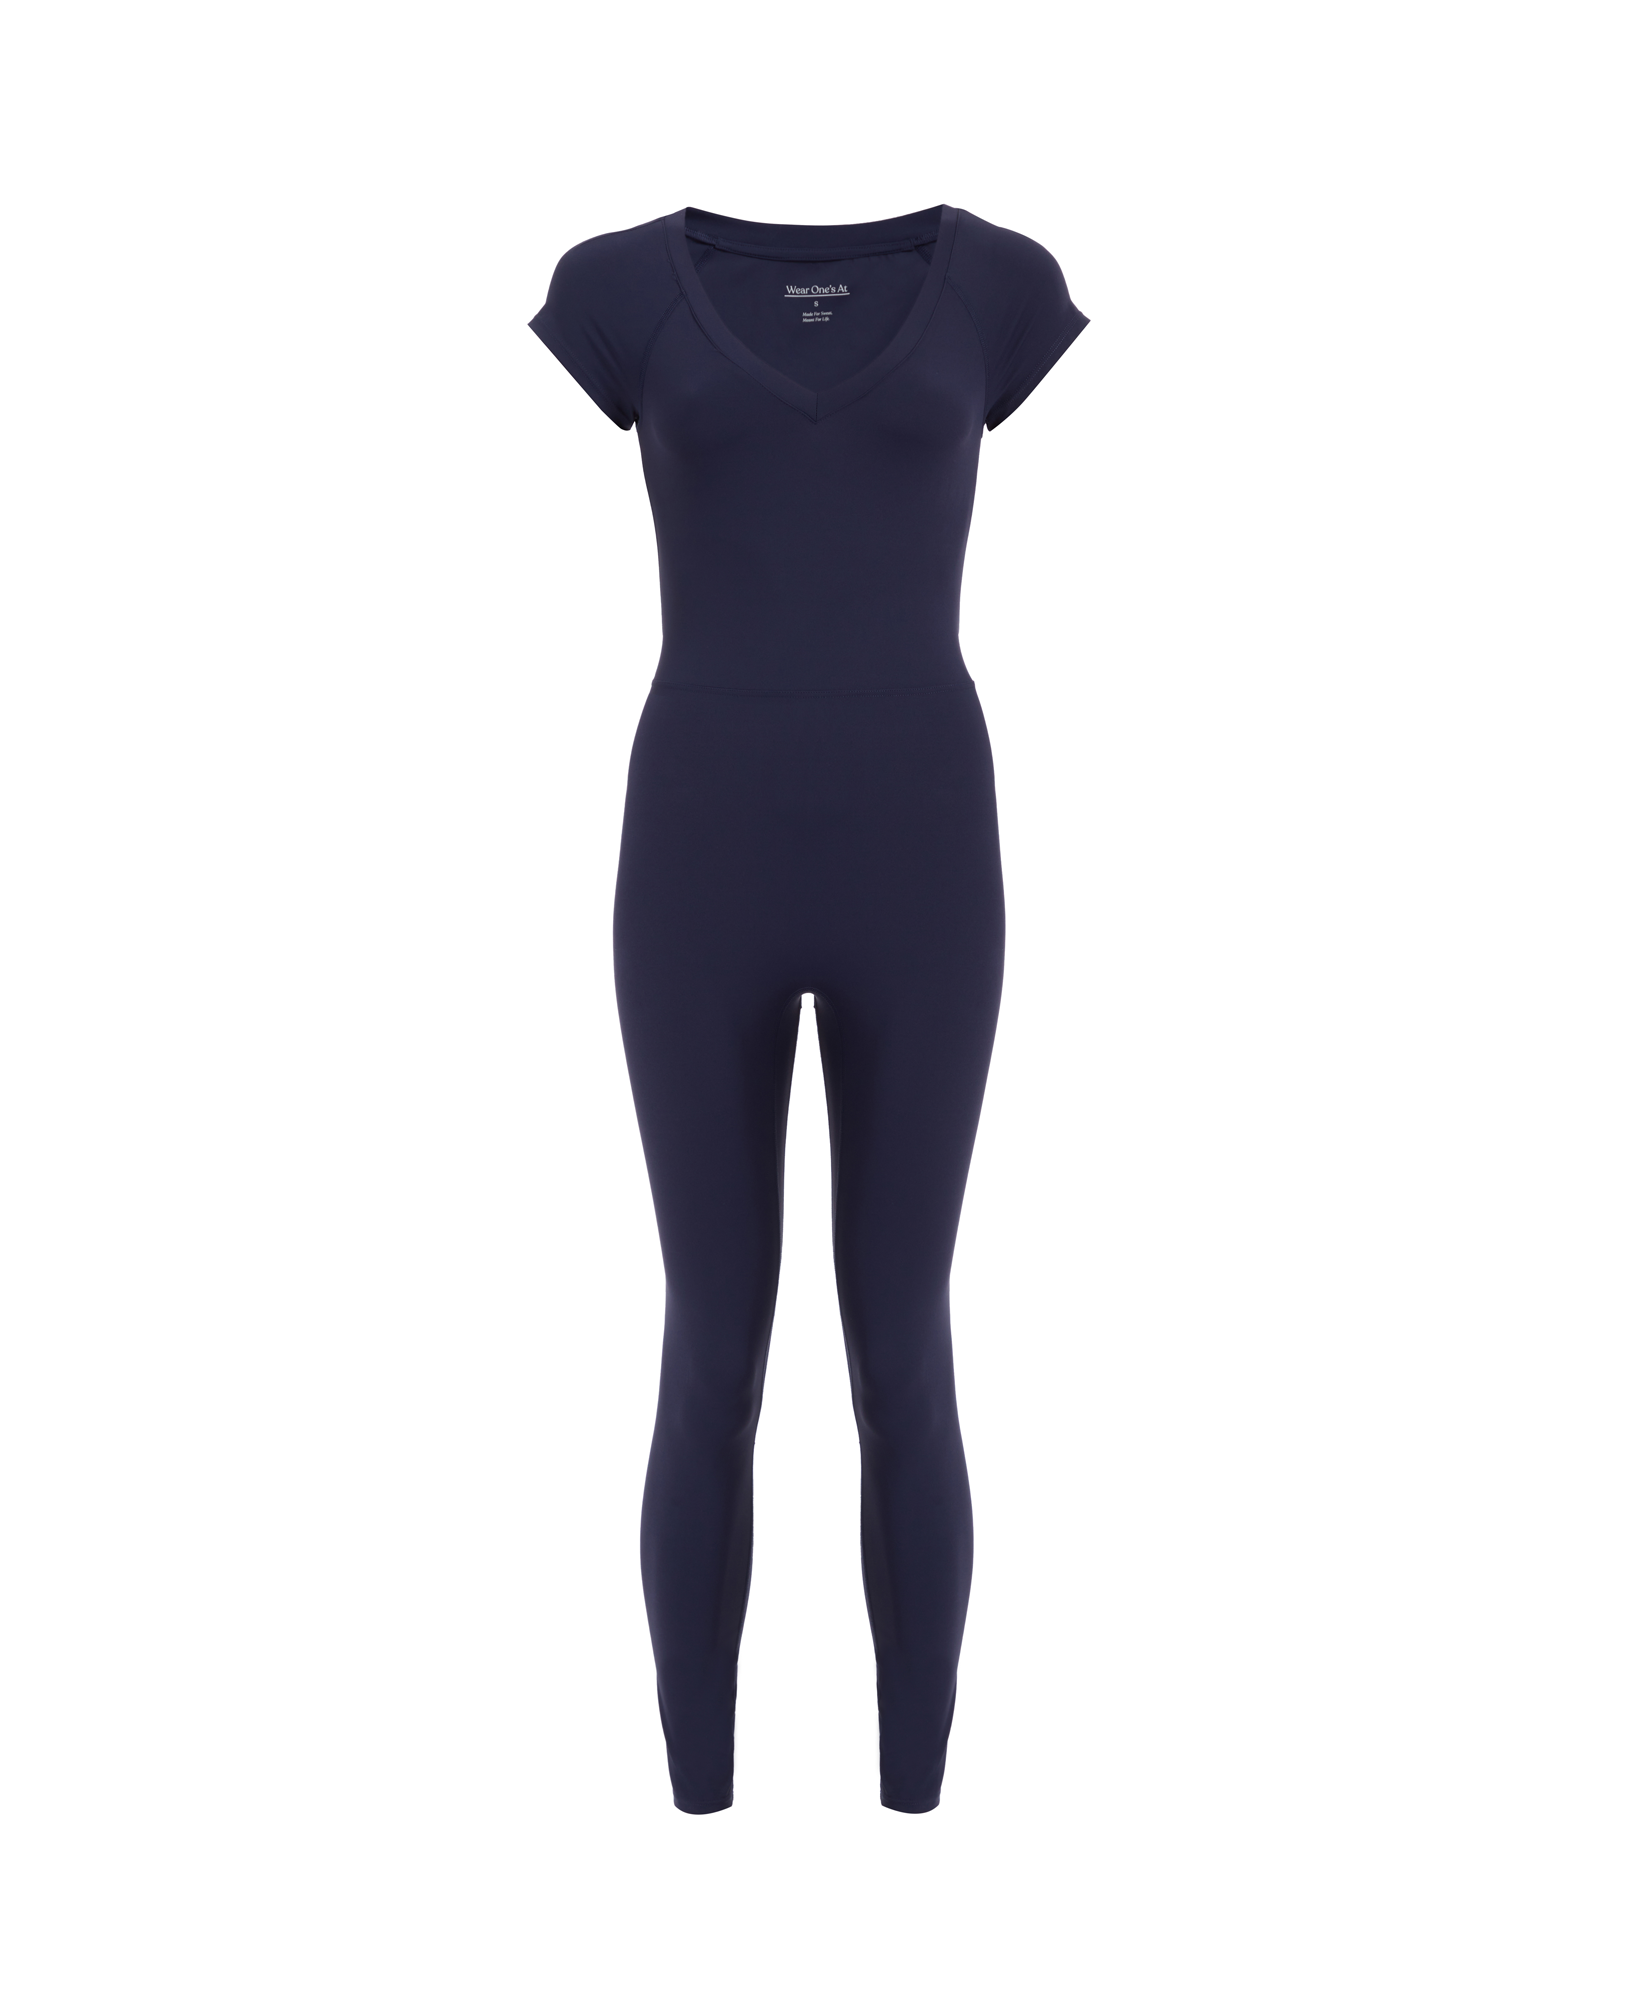 Wear One's At Varsity Unitard in Navy on ghost mannequin front view